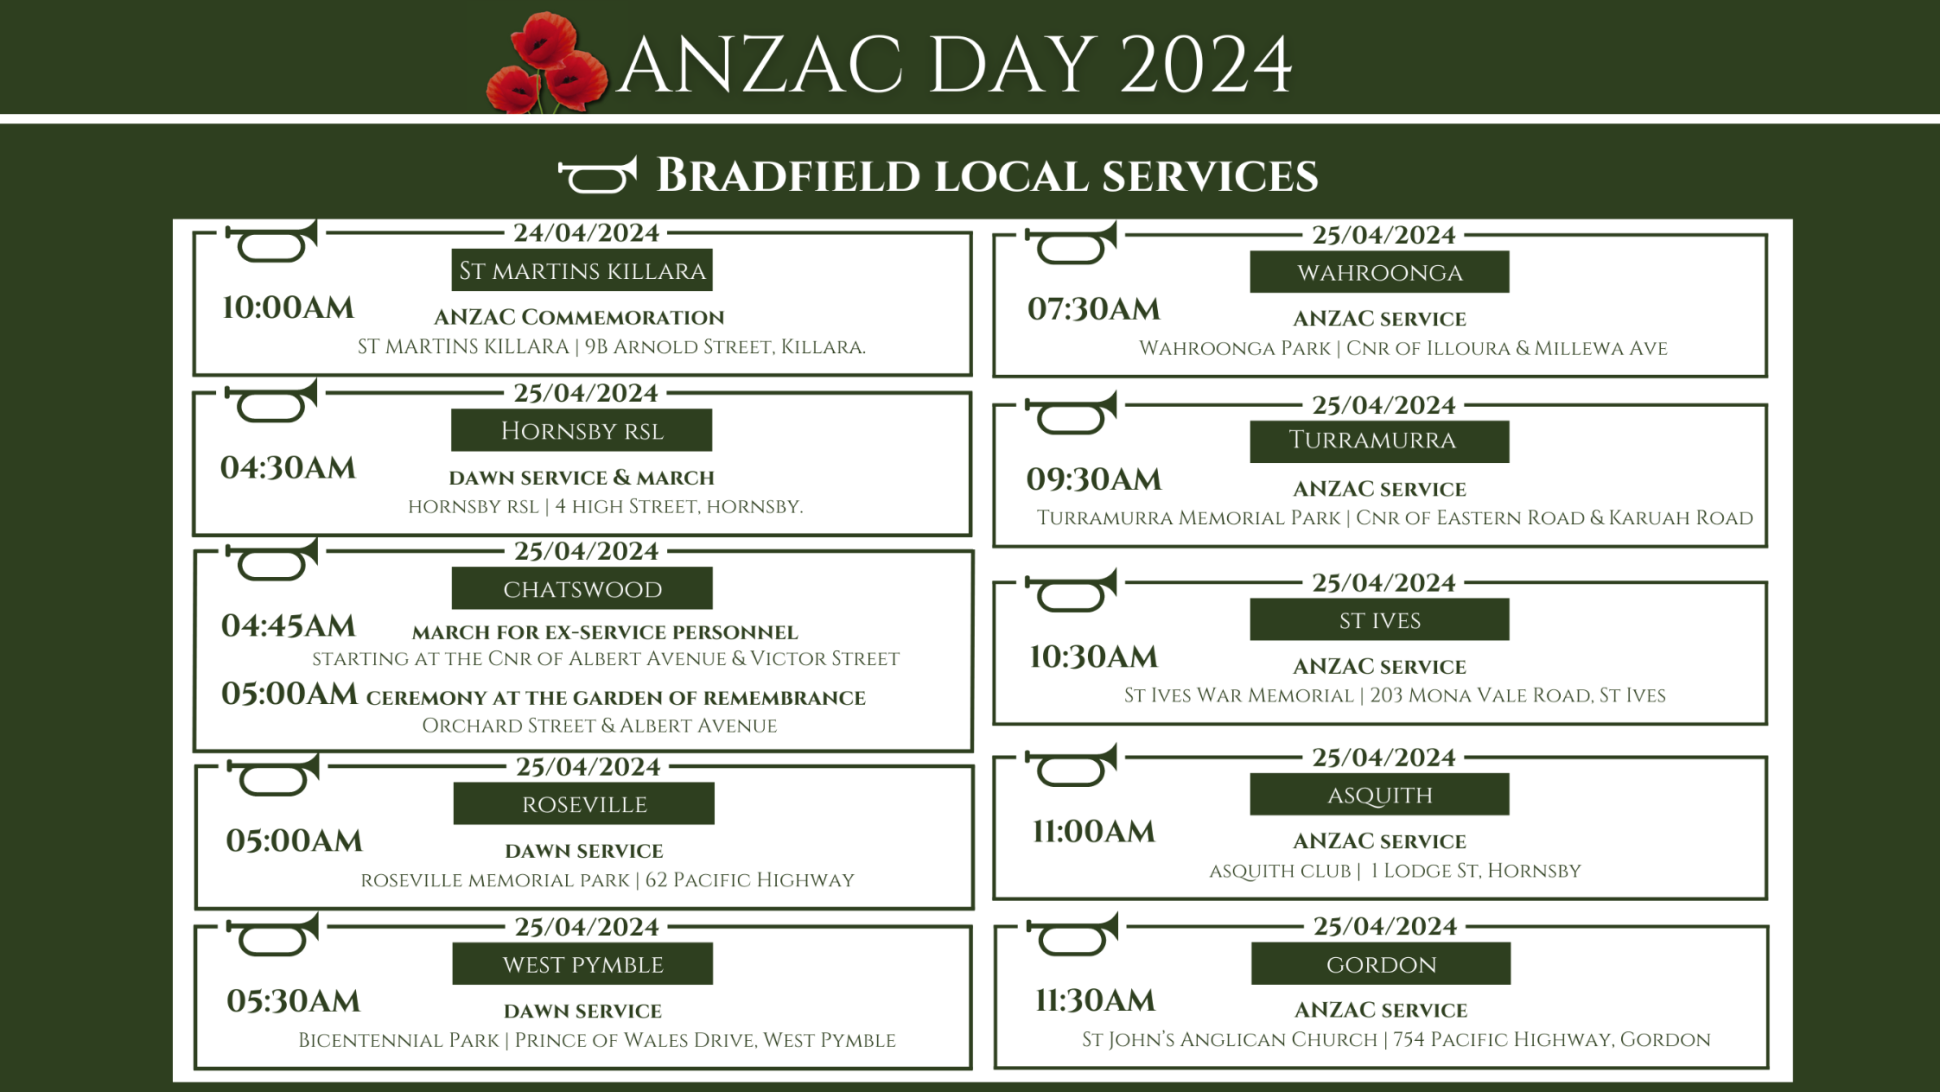 Local Service Information - ANZAC Day 2024